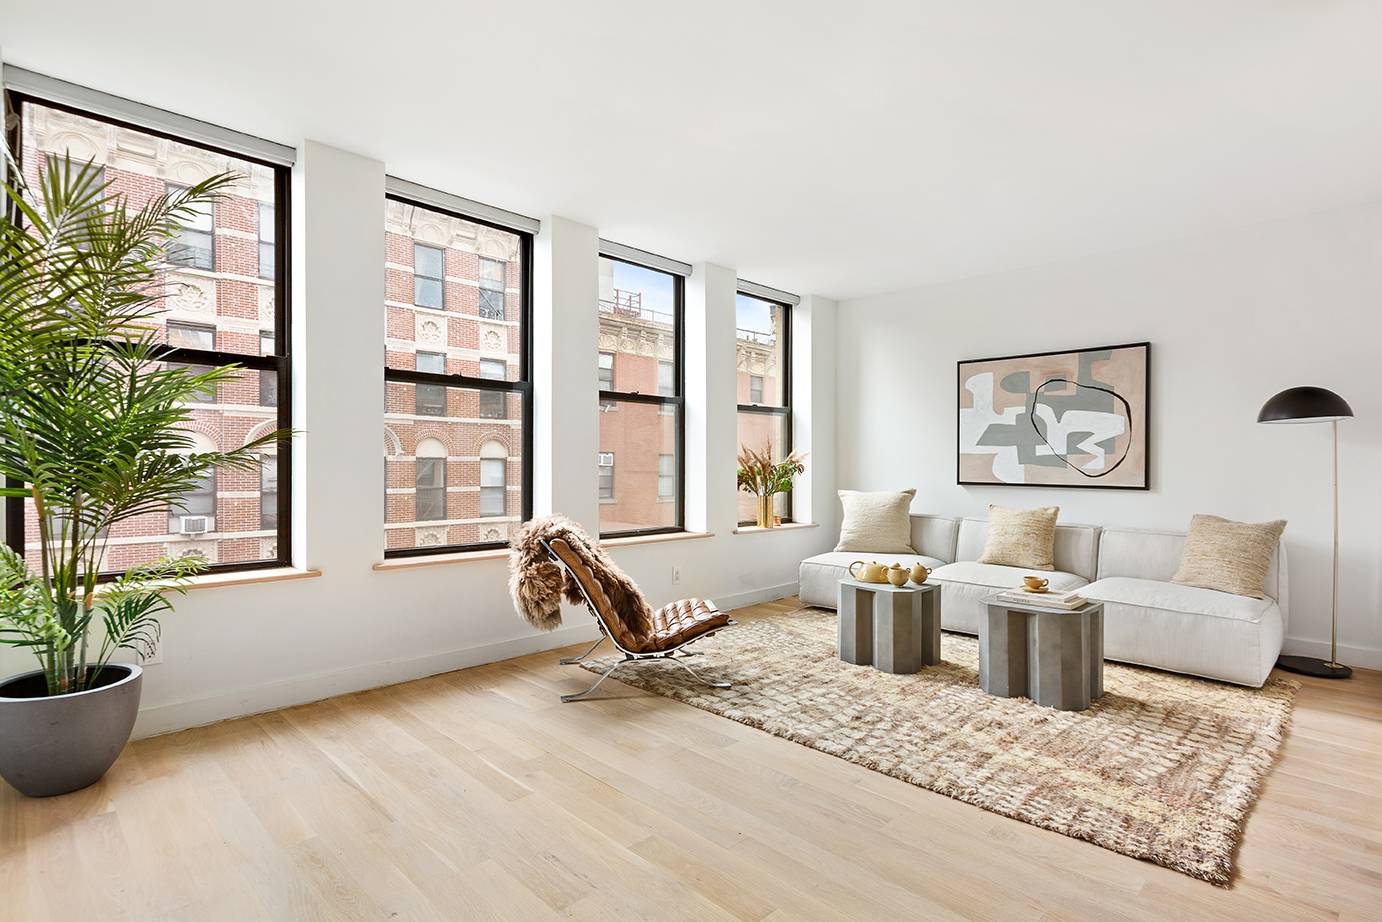 Loft like, sun drenched, and in the heart of the Lower East Side, Residence 4 at 17 Orchard Street is a two bedroom, two bathroom condo, occupying a full floor ...